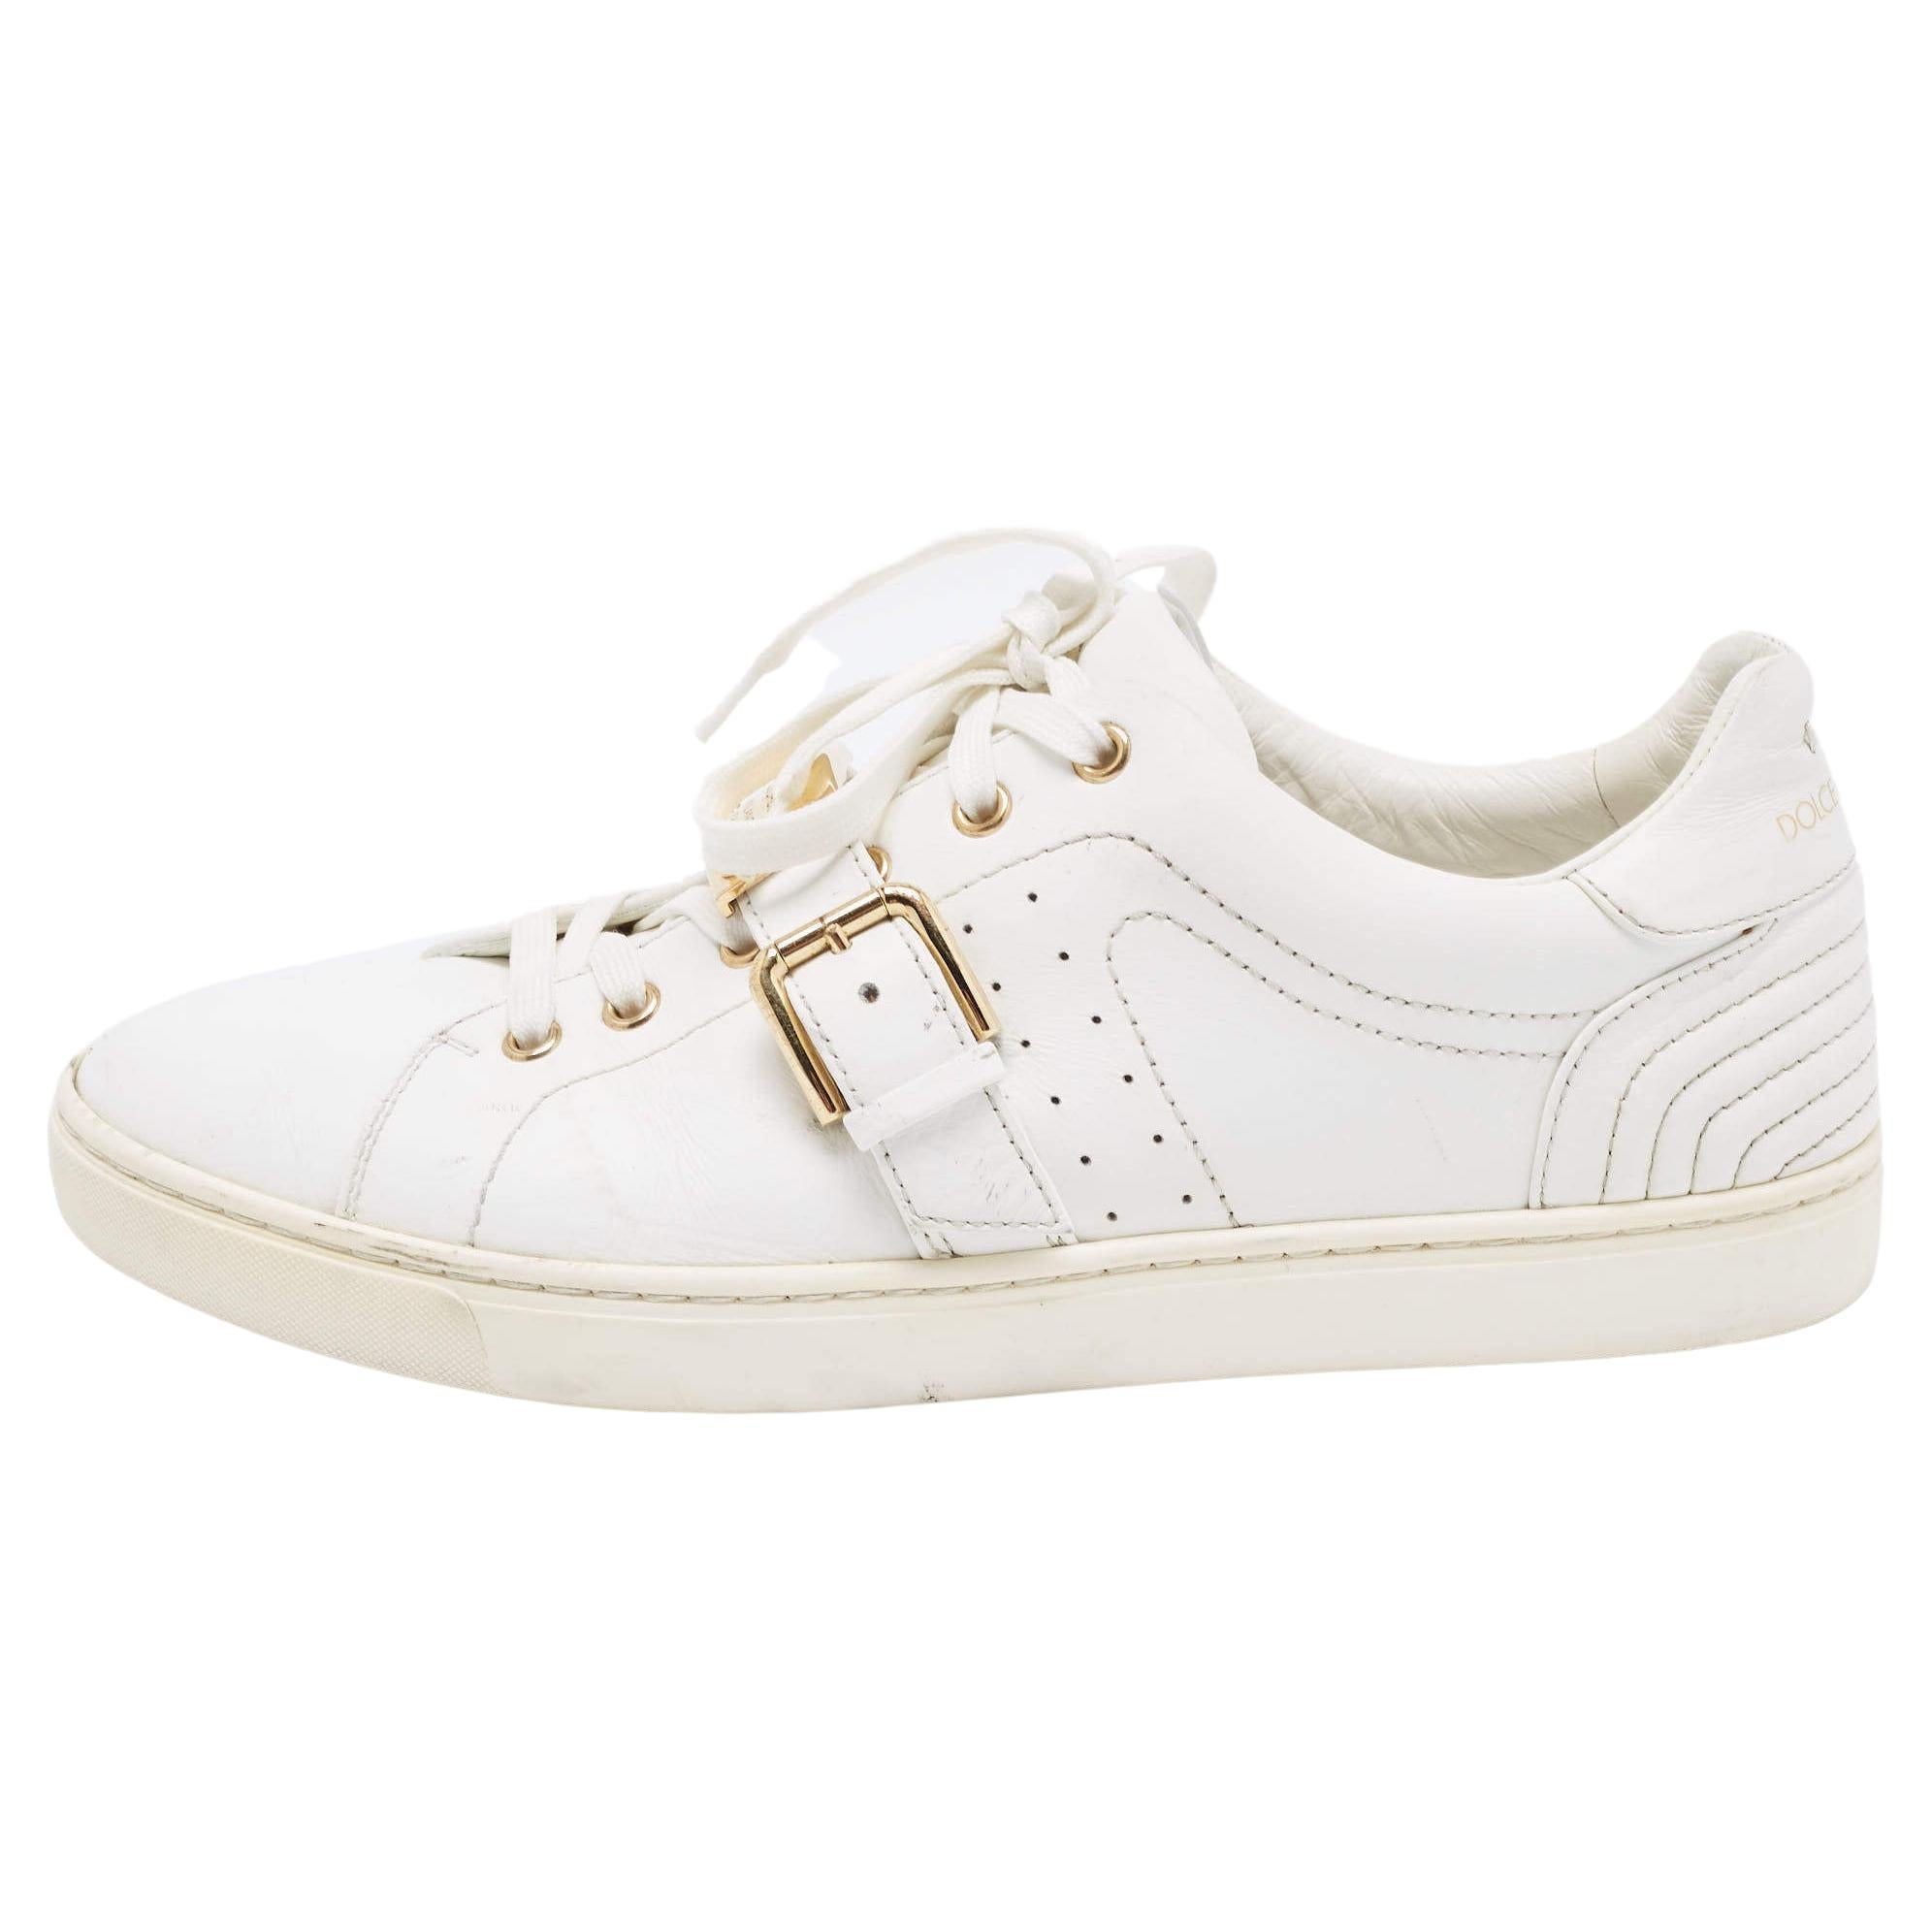 Dolce & Gabbana White Leather Lace Up And Buckle Low Top Sneakers Size 41 For Sale